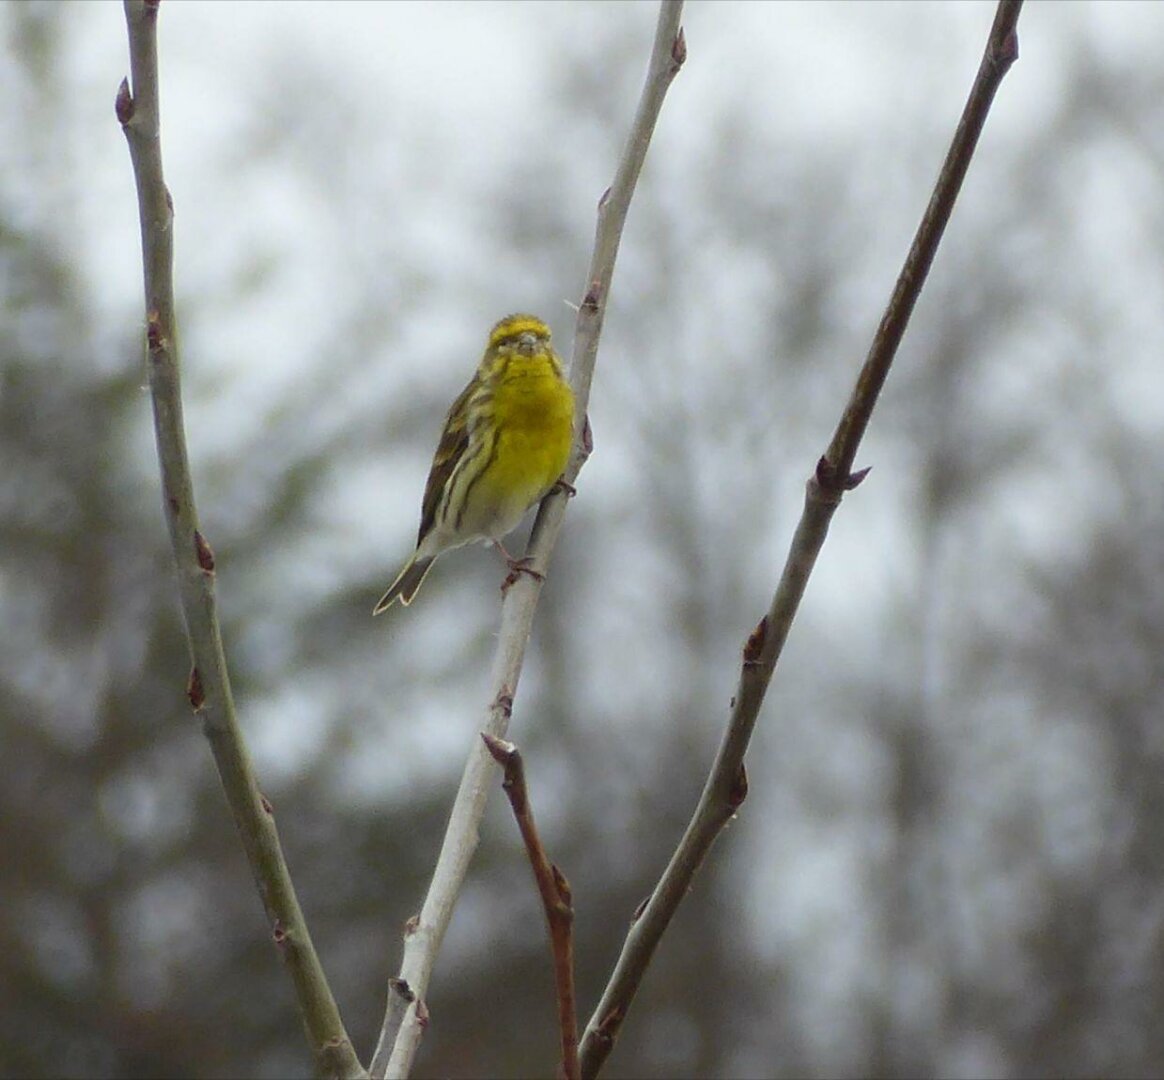 an image or two from my Pixelfed, shows serin who is singing on a branch